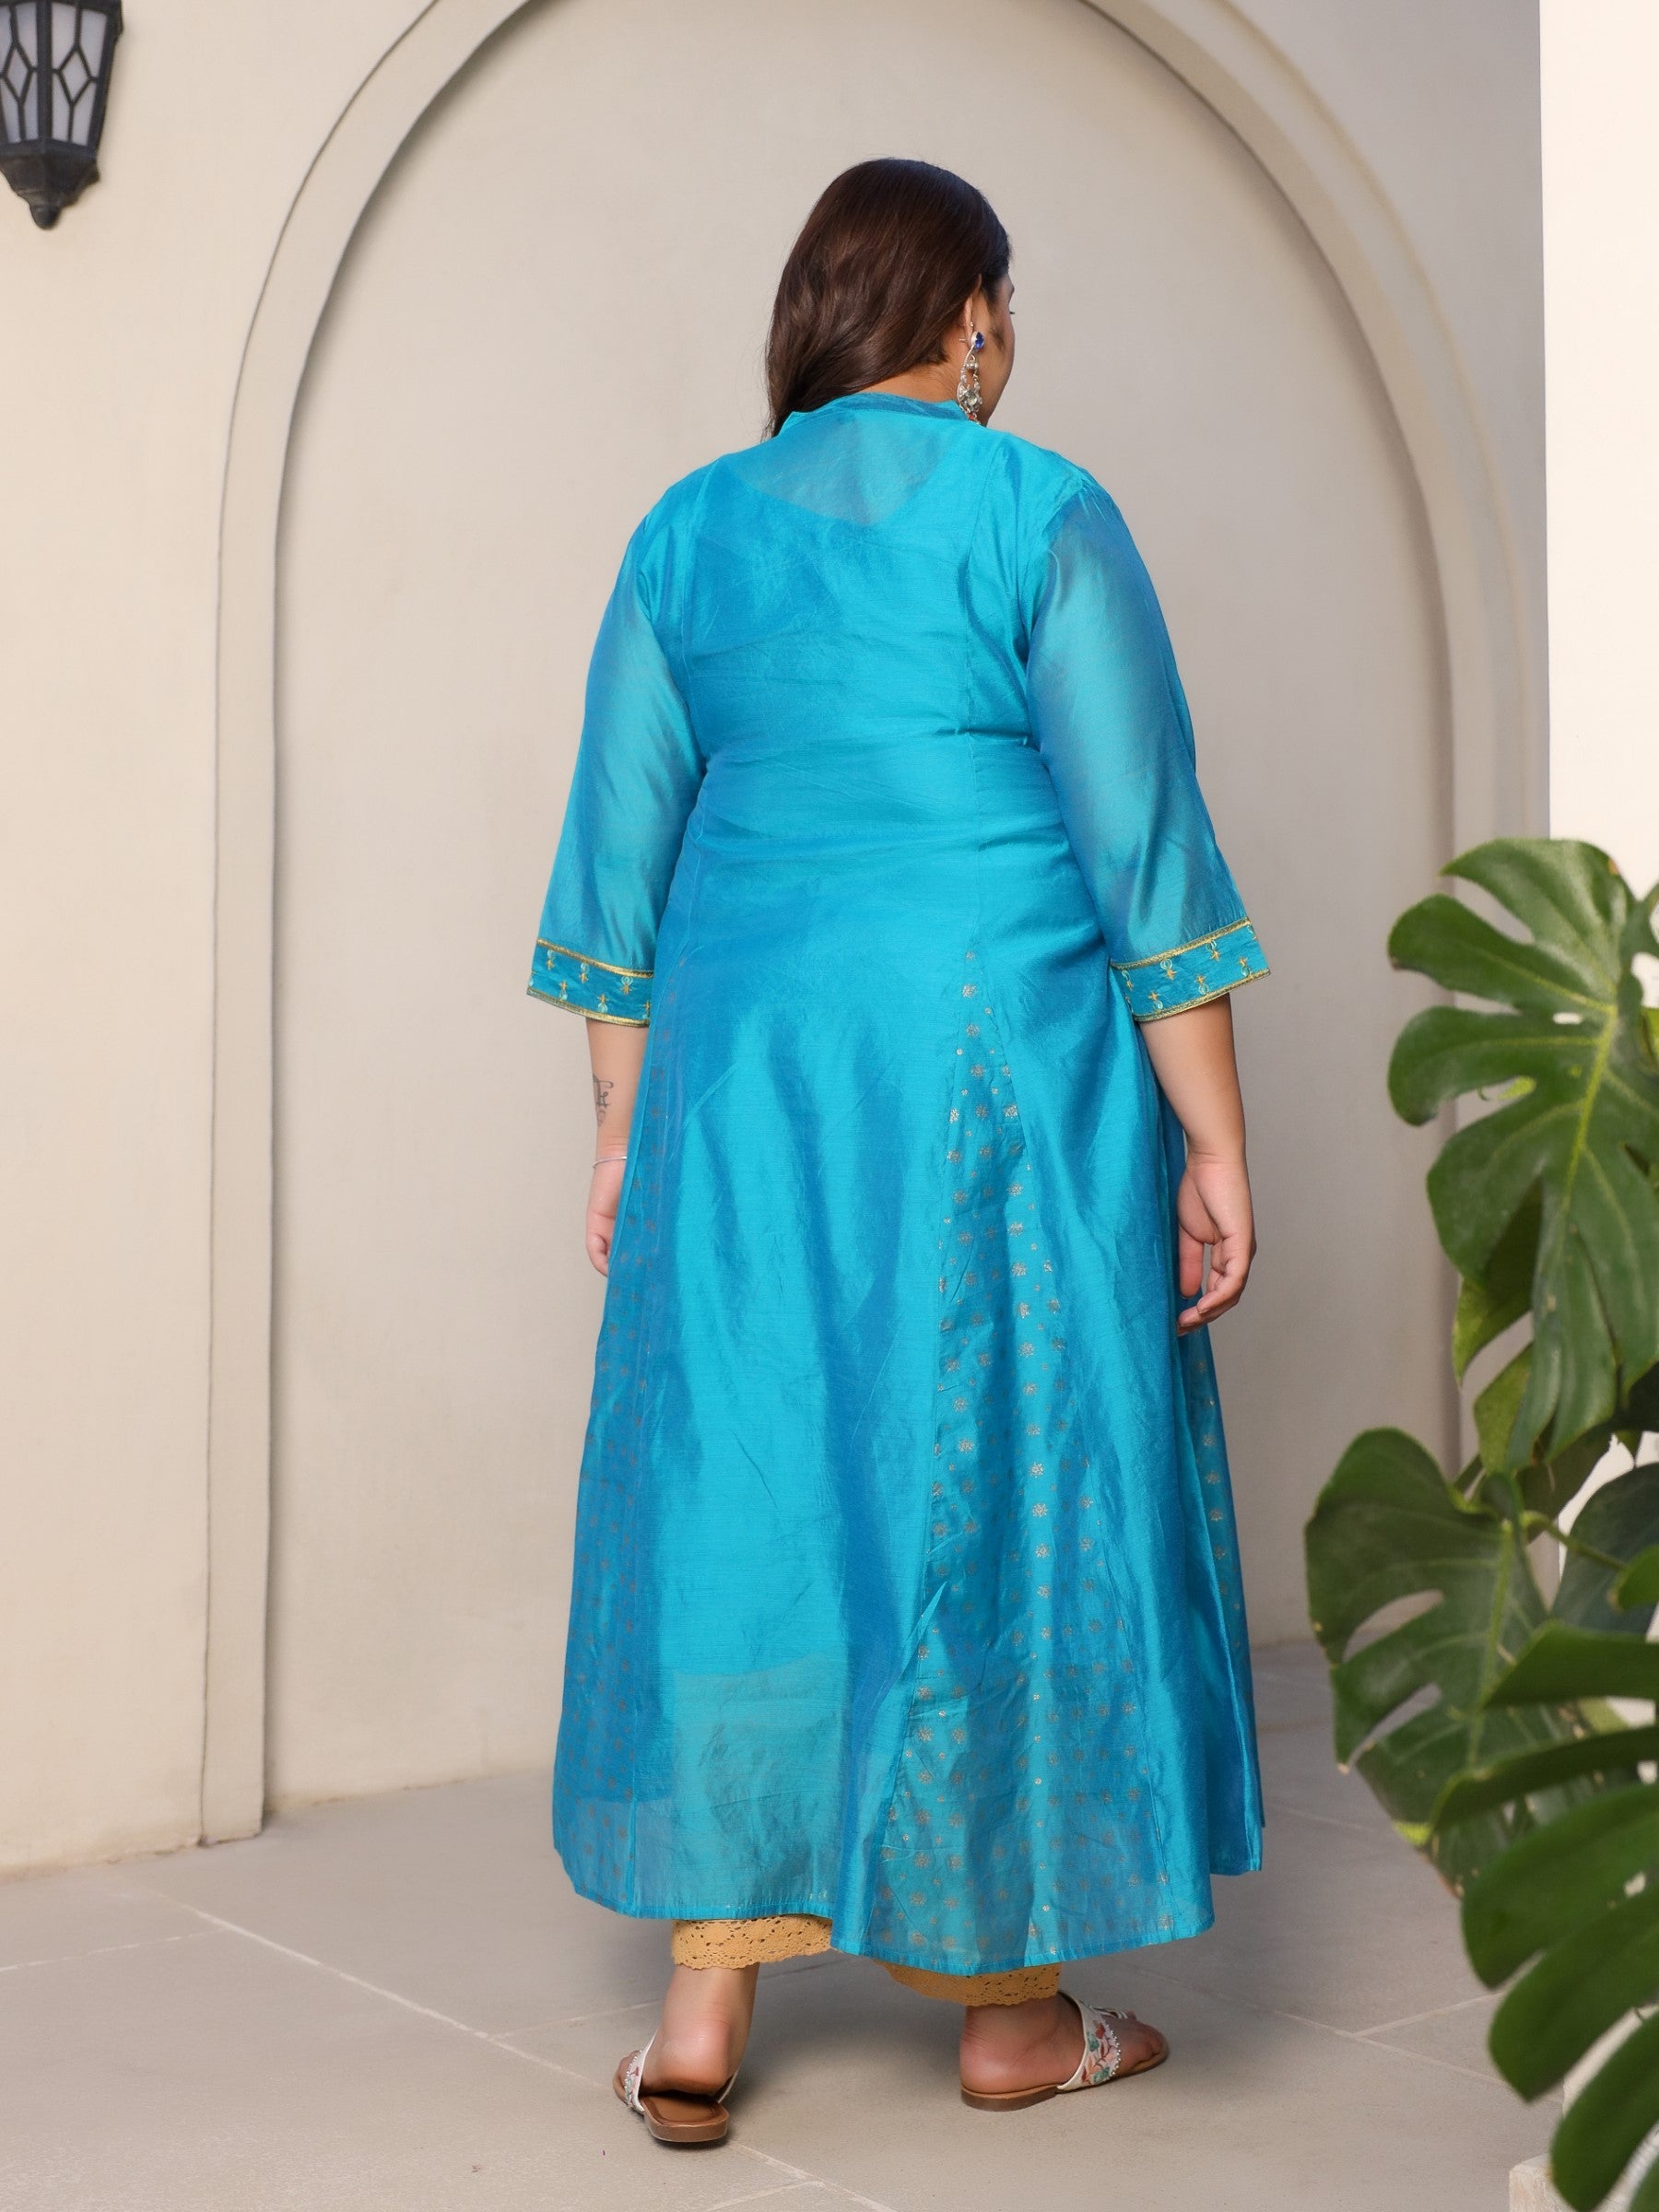 Teal Ethnic Motif Chanderi Printed & Panelled Plus Size Anarkali Kurta With Embroidery